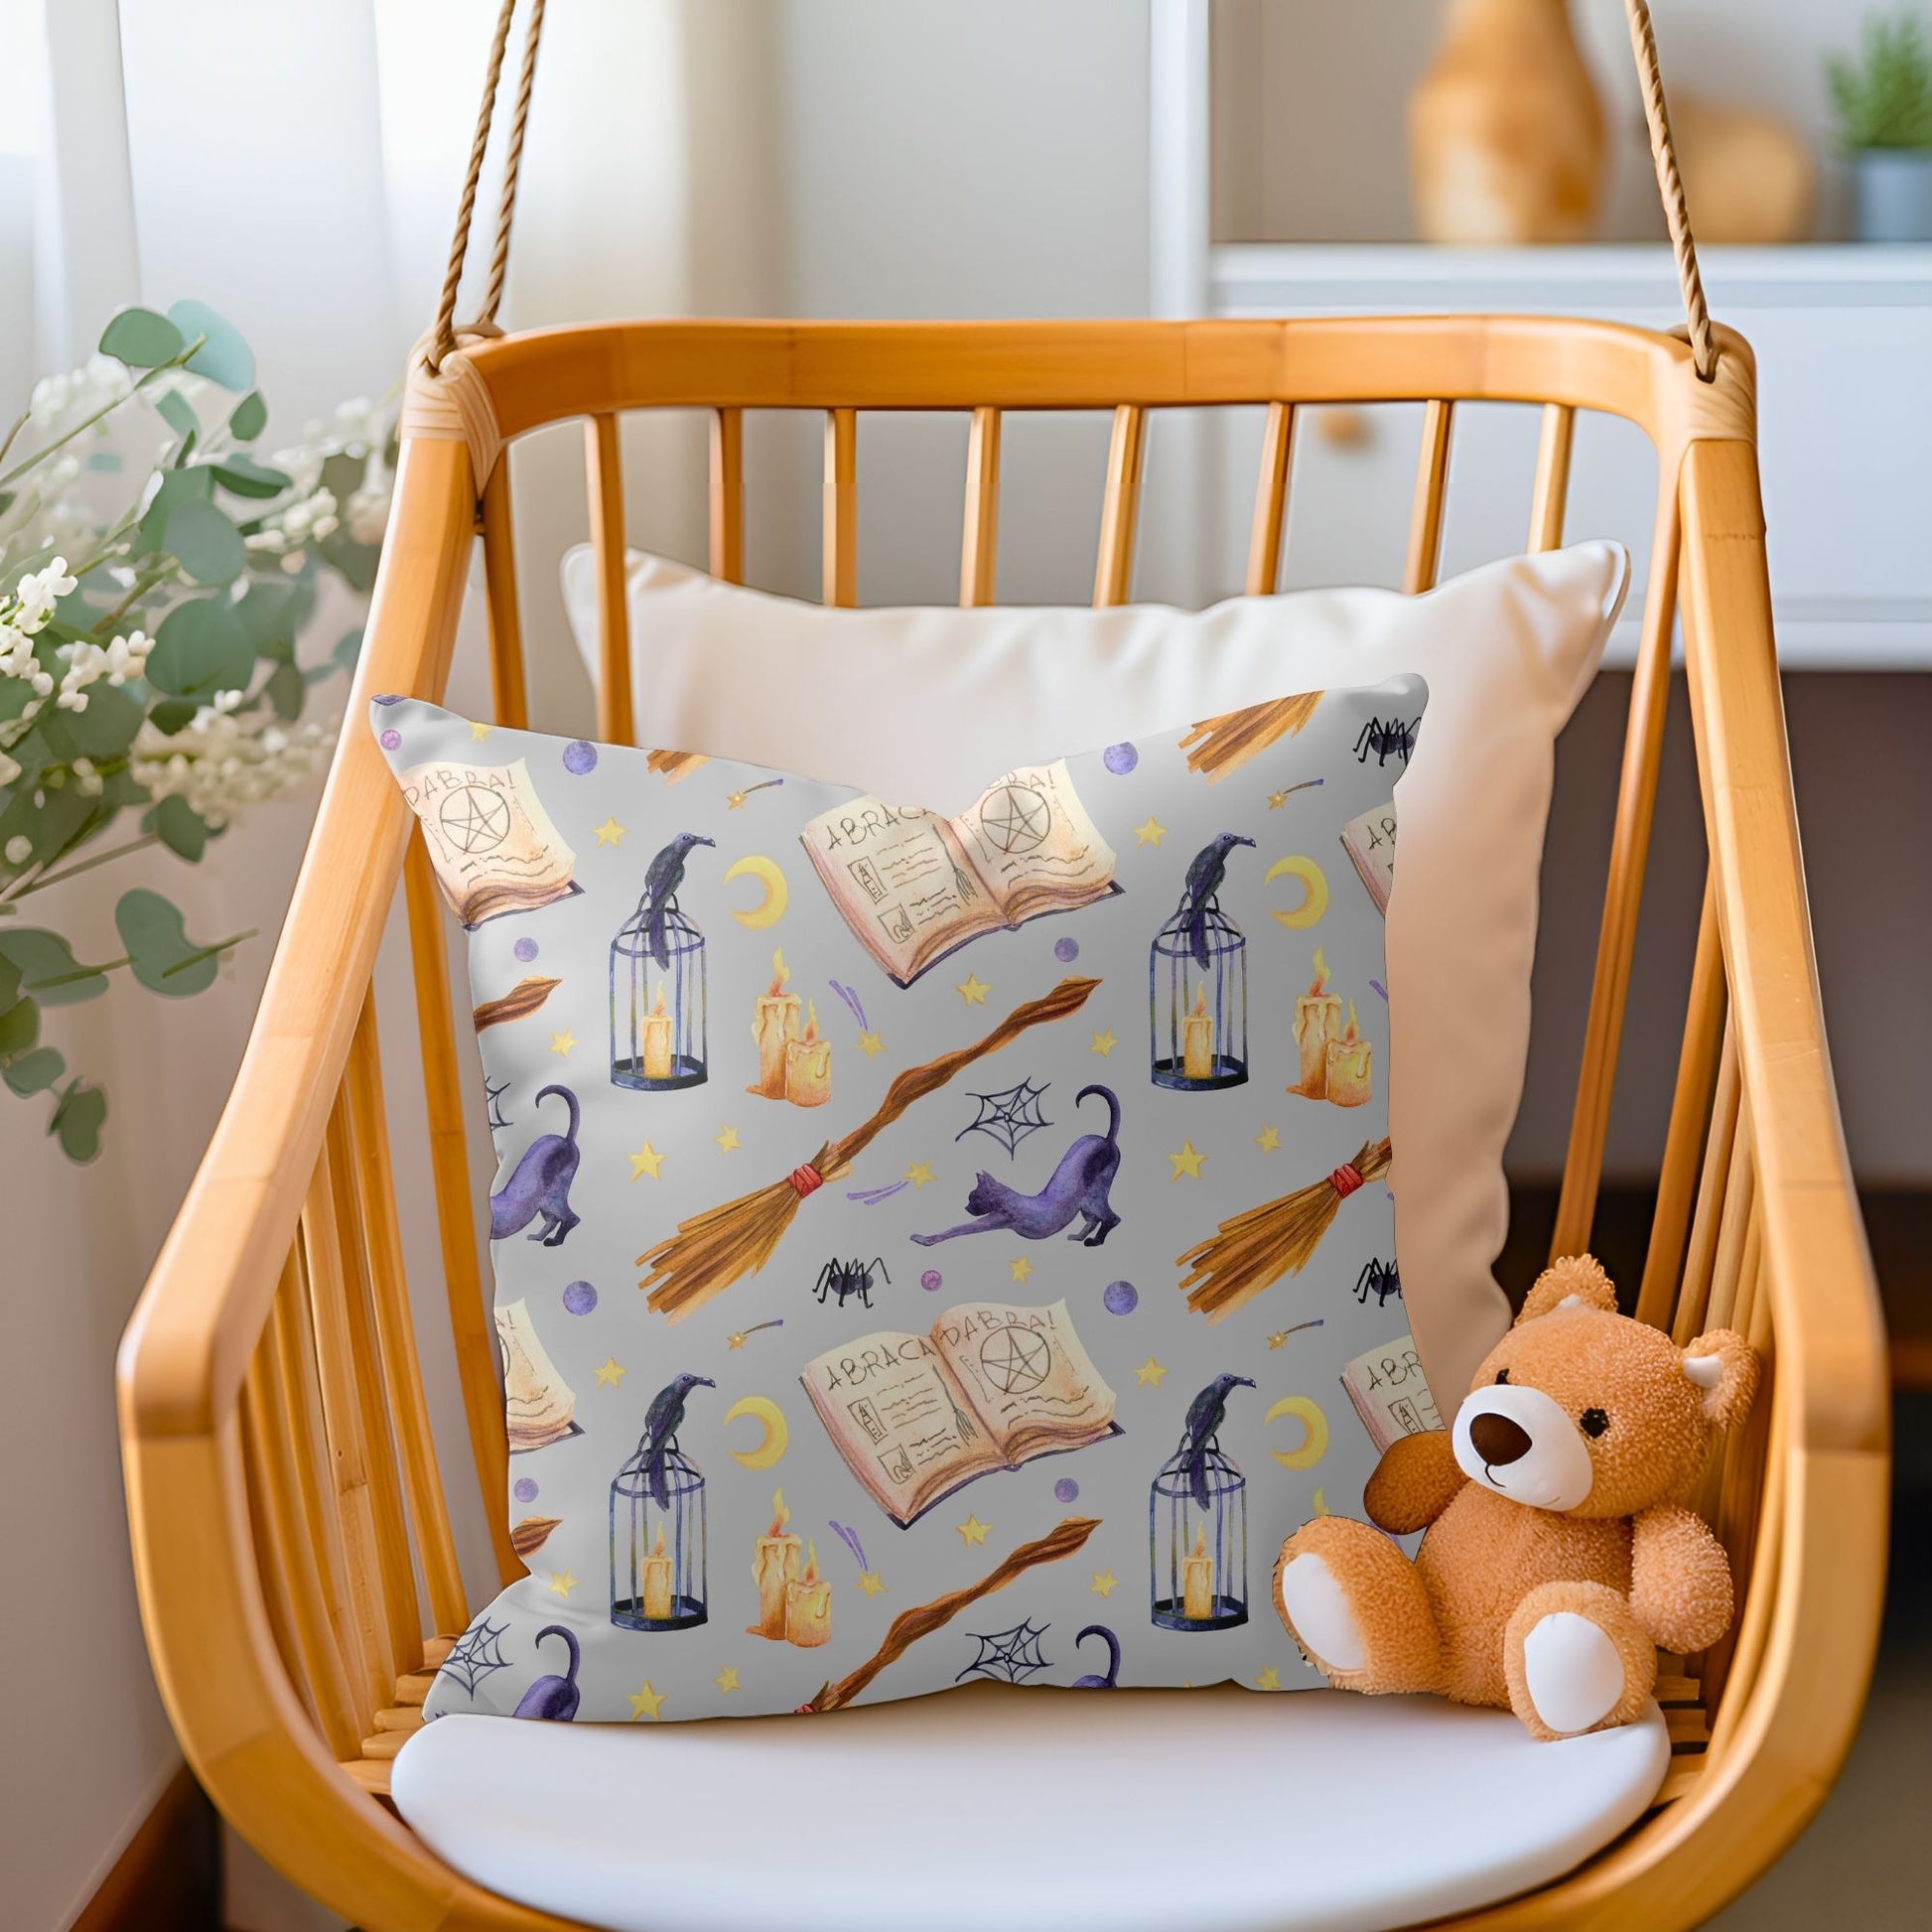 Kids pillow featuring a wizarding pattern for magical dreams.